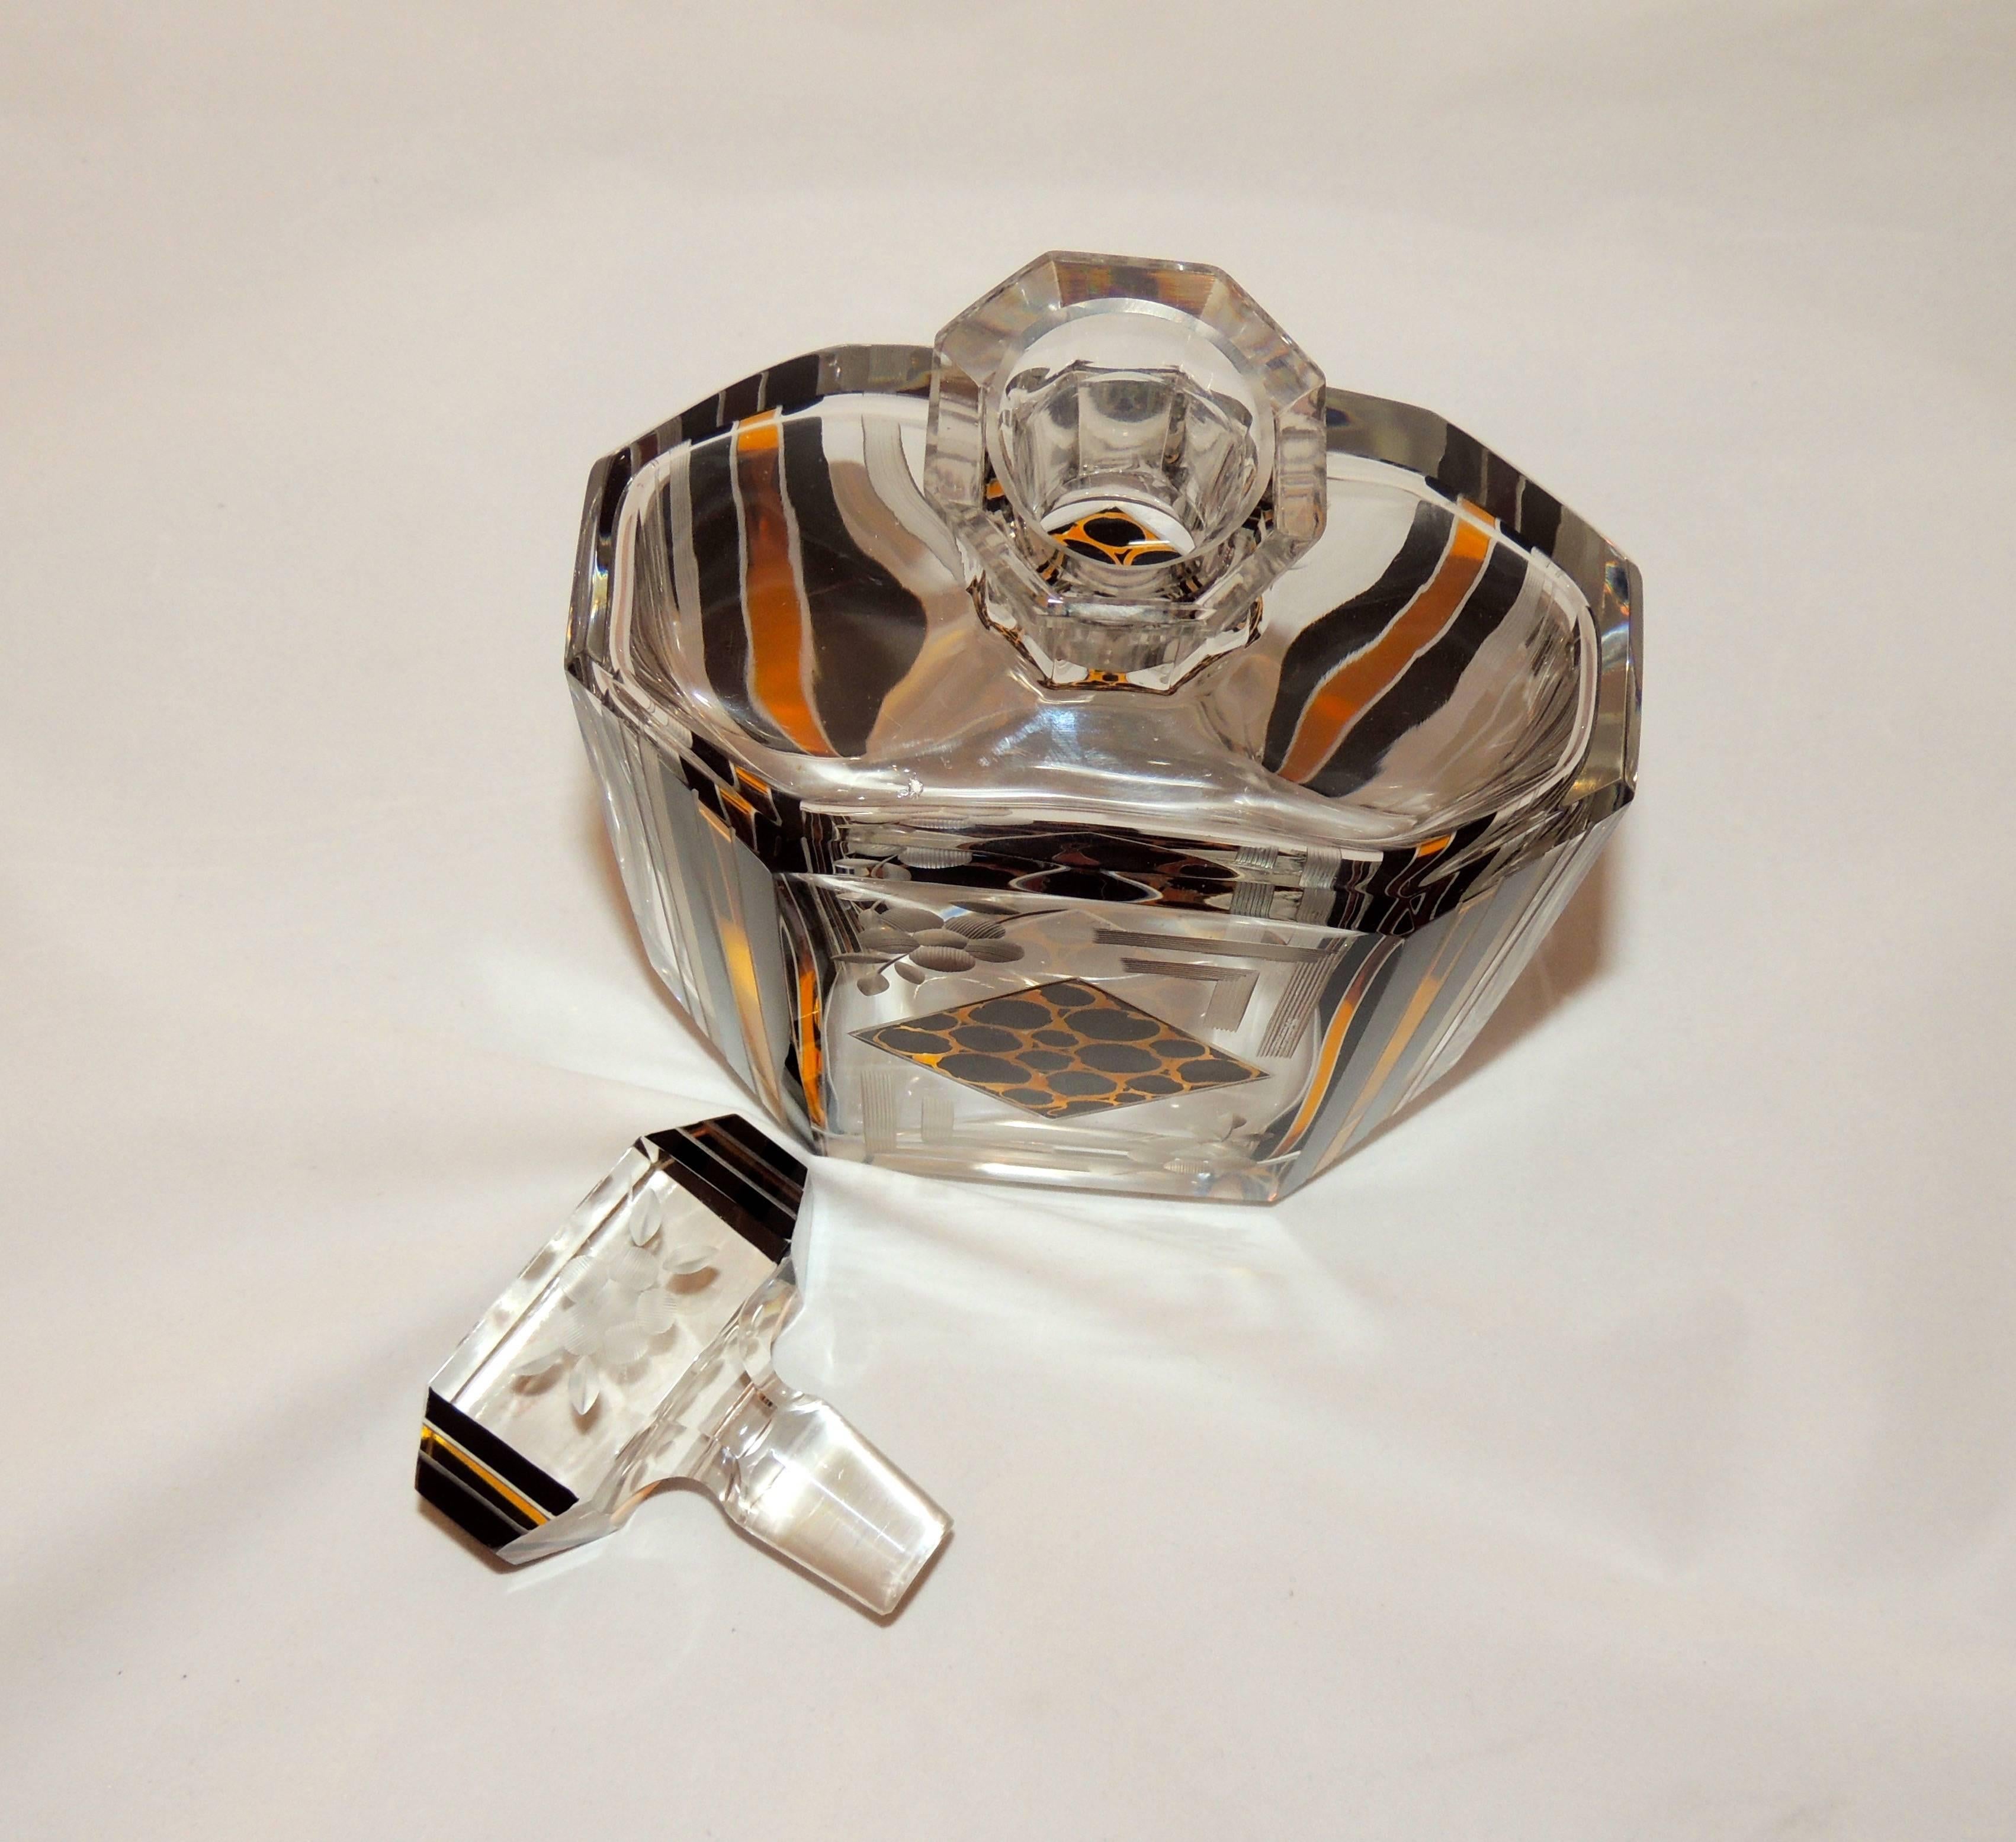 This Art Deco Czech Decanter set is a little bit wild with its leopard patterned detail but also delicately etched and Classic.

With its six matching glasses, two tone decoration and grand stopper that also carries through the color treatment, it